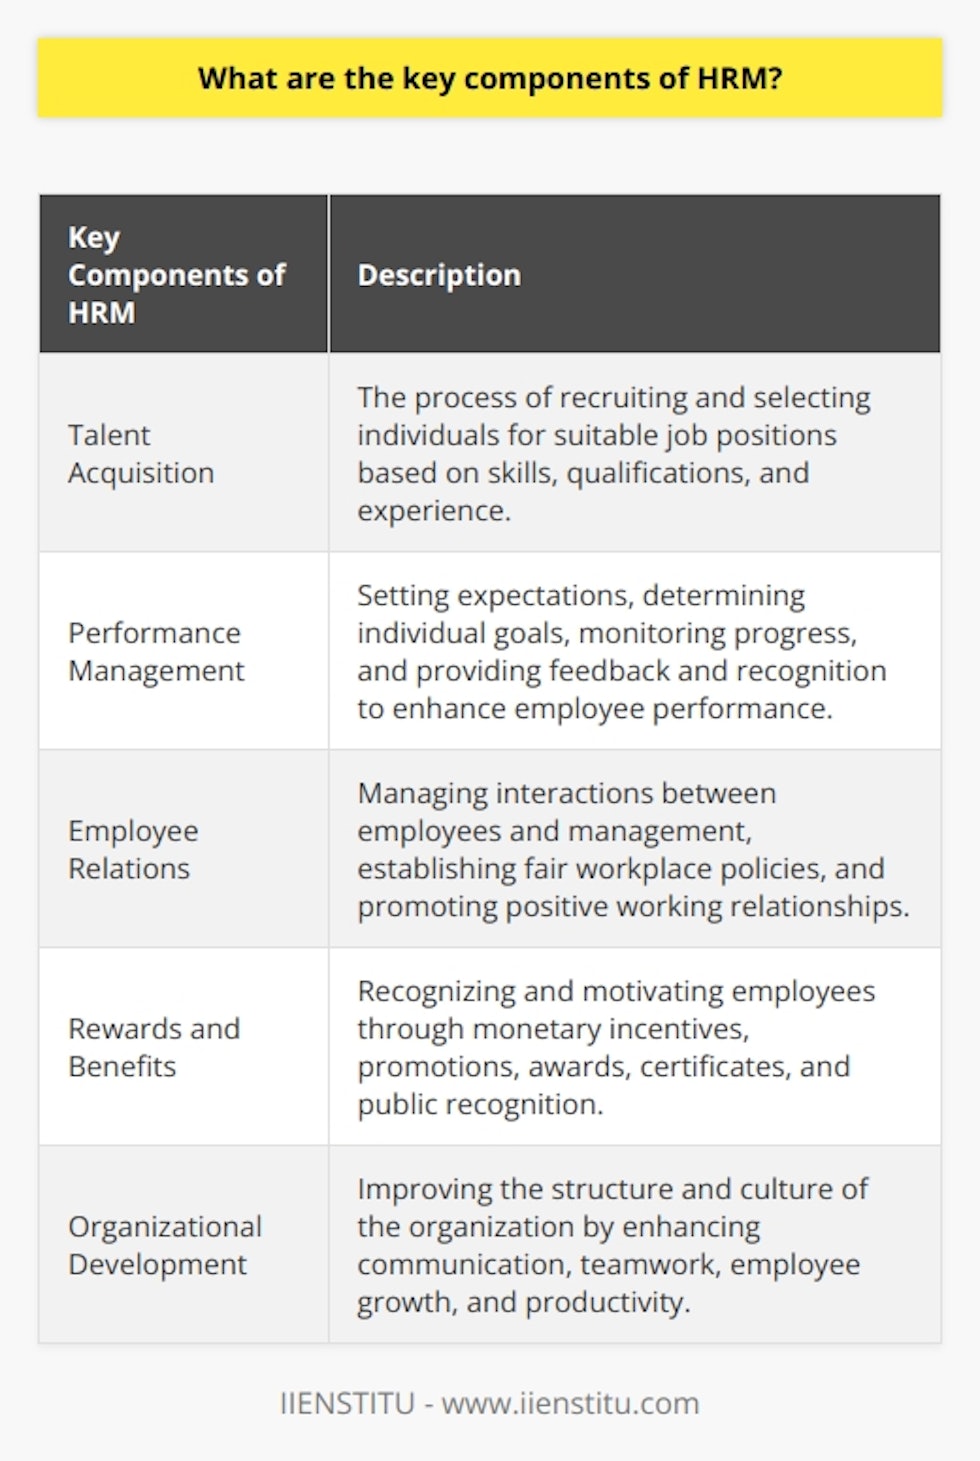 This content provides information on the key components of HRM (Human Resource Management), which is crucial for the success of any business organization. HRM encompasses various components that need to be effectively managed to ensure the smooth functioning of an organization. The key features of HRM include talent acquisition, performance management, employee relations, rewards and benefits, and organizational development.Talent acquisition plays a vital role in HRM as it involves the process of recruiting and selecting the right individuals for suitable job positions. This entails assessing potential candidates based on their skills, qualifications, and experience, as well as negotiating salaries and benefits to attract and retain top talent.Performance management is another significant component of HRM, involving setting expectations for employees, determining individual goals, monitoring progress toward these goals, and providing constructive feedback and recognition. This enables employees to understand their roles and responsibilities clearly and helps enhance their performance and productivity.Employee relations focuses on managing interactions between employees and management within the organization. HRM ensures the establishment of fair and respectful workplace policies and procedures that promote positive working relationships. This component aims to create a harmonious and inclusive work environment that fosters effective communication and teamwork.Rewards and benefits are crucial aspects of HRM that recognize and motivate employees for their exceptional performance. This includes providing monetary incentives such as bonuses and promotions, as well as other forms of recognition such as awards, certificates, or public recognition. By offering attractive rewards and benefits, HRM aims to boost employee morale and job satisfaction.Lastly, organizational development is an essential component of HRM that focuses on improving the structure and culture of the organization. HRM professionals work towards creating an environment that encourages employee growth, collaboration, and productivity. This includes implementing strategies to enhance communication, teamwork, and employee engagement, as well as identifying areas for improvement and implementing necessary changes.In conclusion, the key components of HRM include talent acquisition, performance management, employee relations, rewards and benefits, and organizational development. Each of these components is crucial for the success of an organization and must be effectively managed to achieve desired outcomes. HRM plays a vital role in hiring, developing, and managing employees to ensure the achievement of organizational goals and objectives.